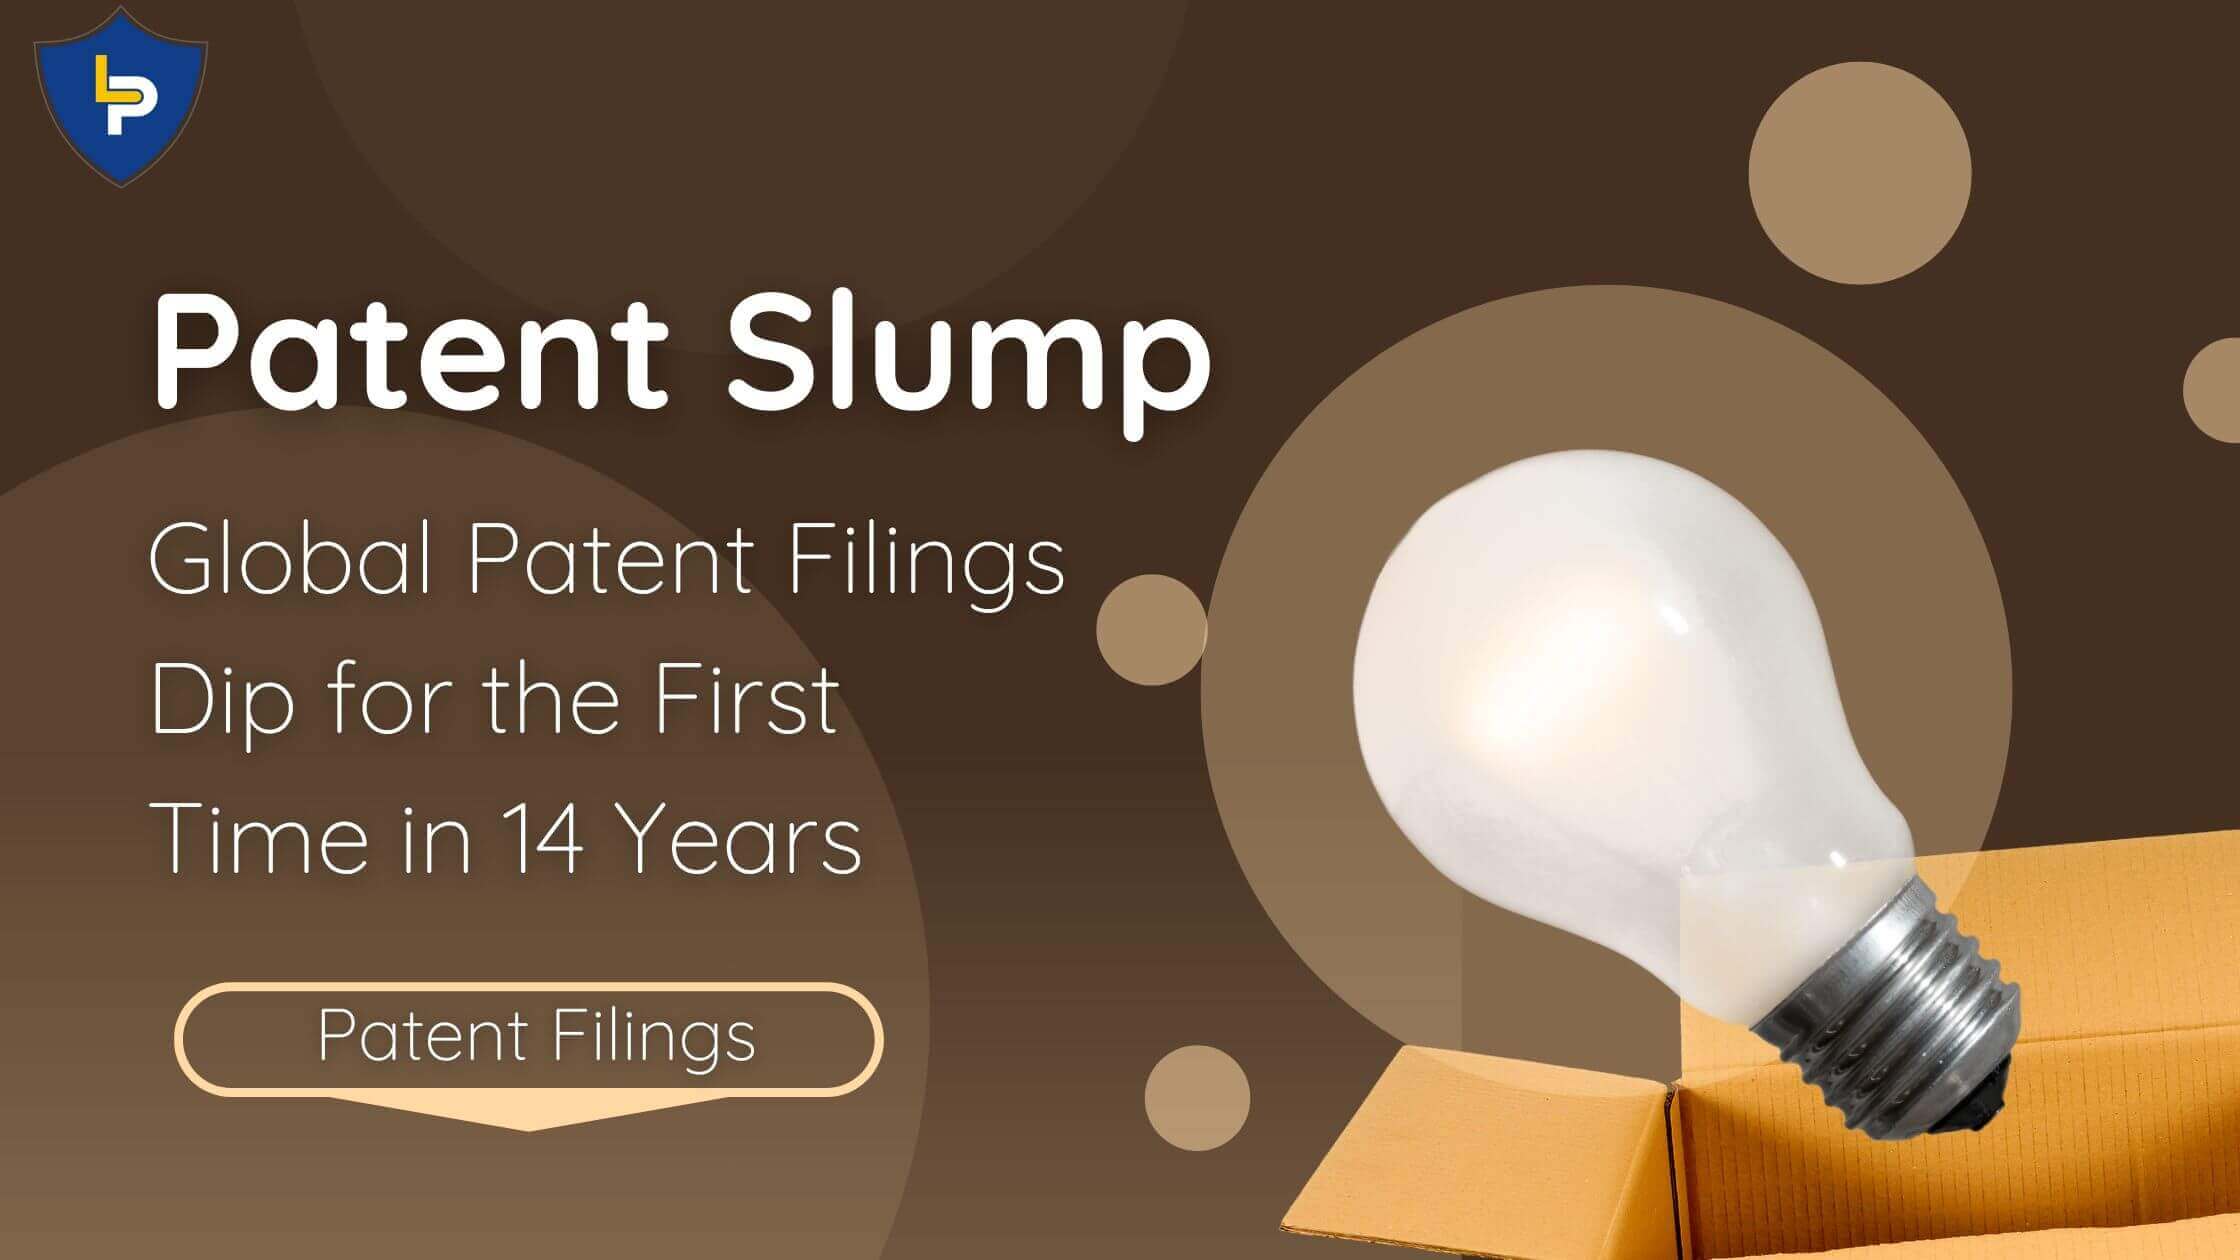 Global Patent Filings Dip for the First Time in 14 Years